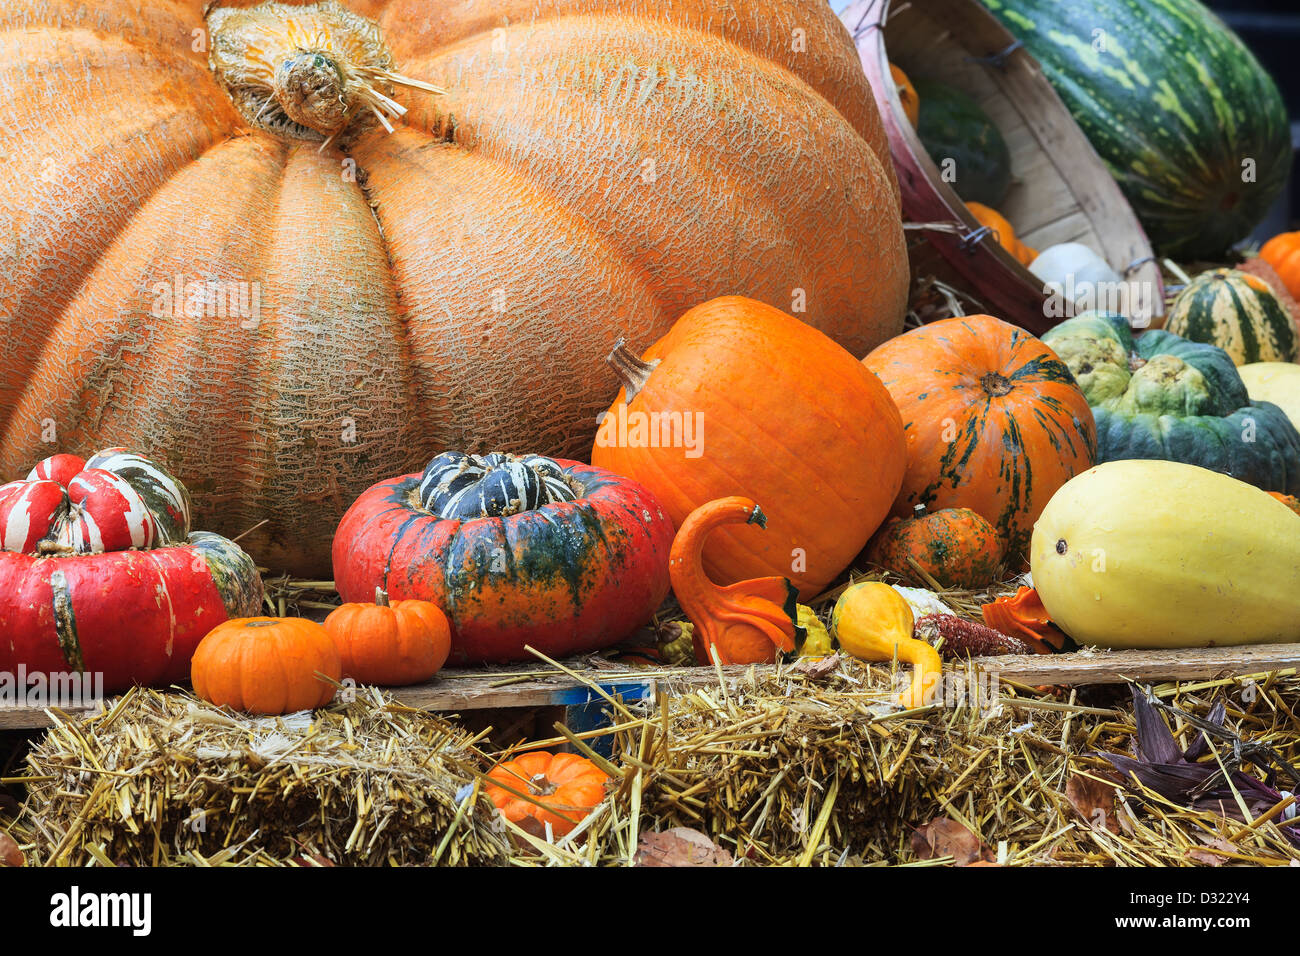 Thanksgiving display, fall harvest of pumpkins and squash. Stock Photo